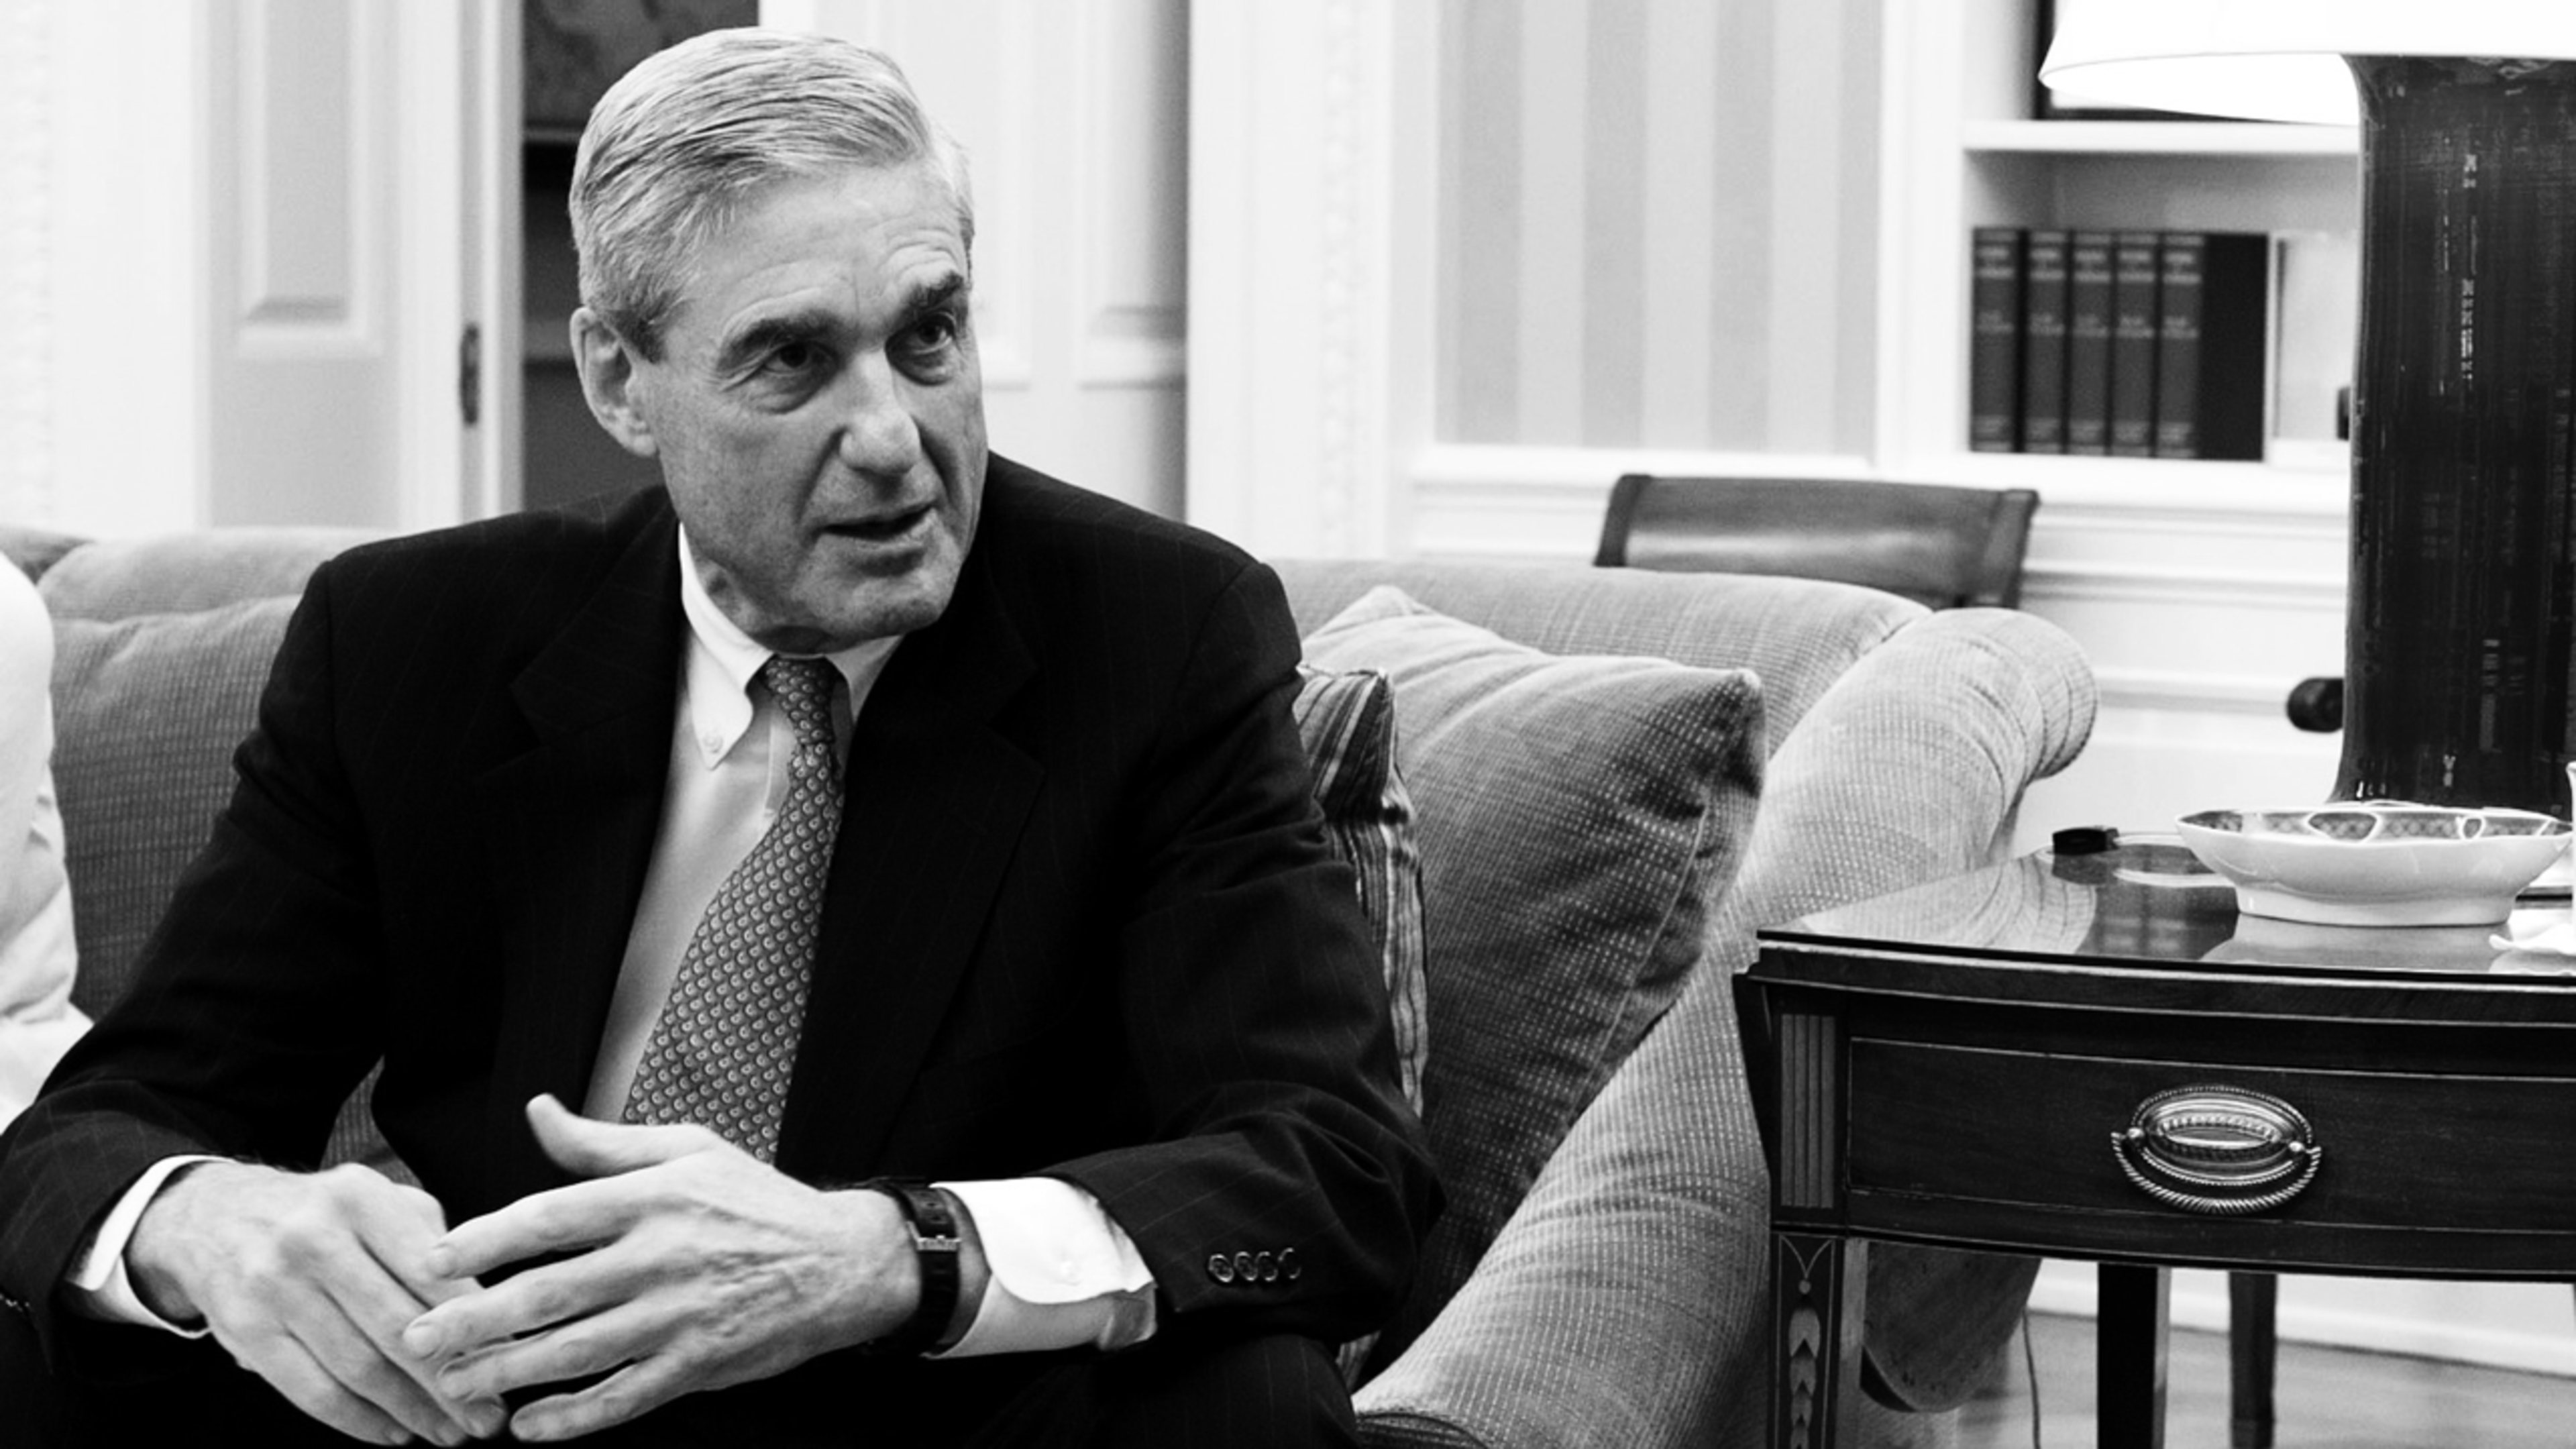 Mueller report: Here’s the summary, but when will we see the whole thing?